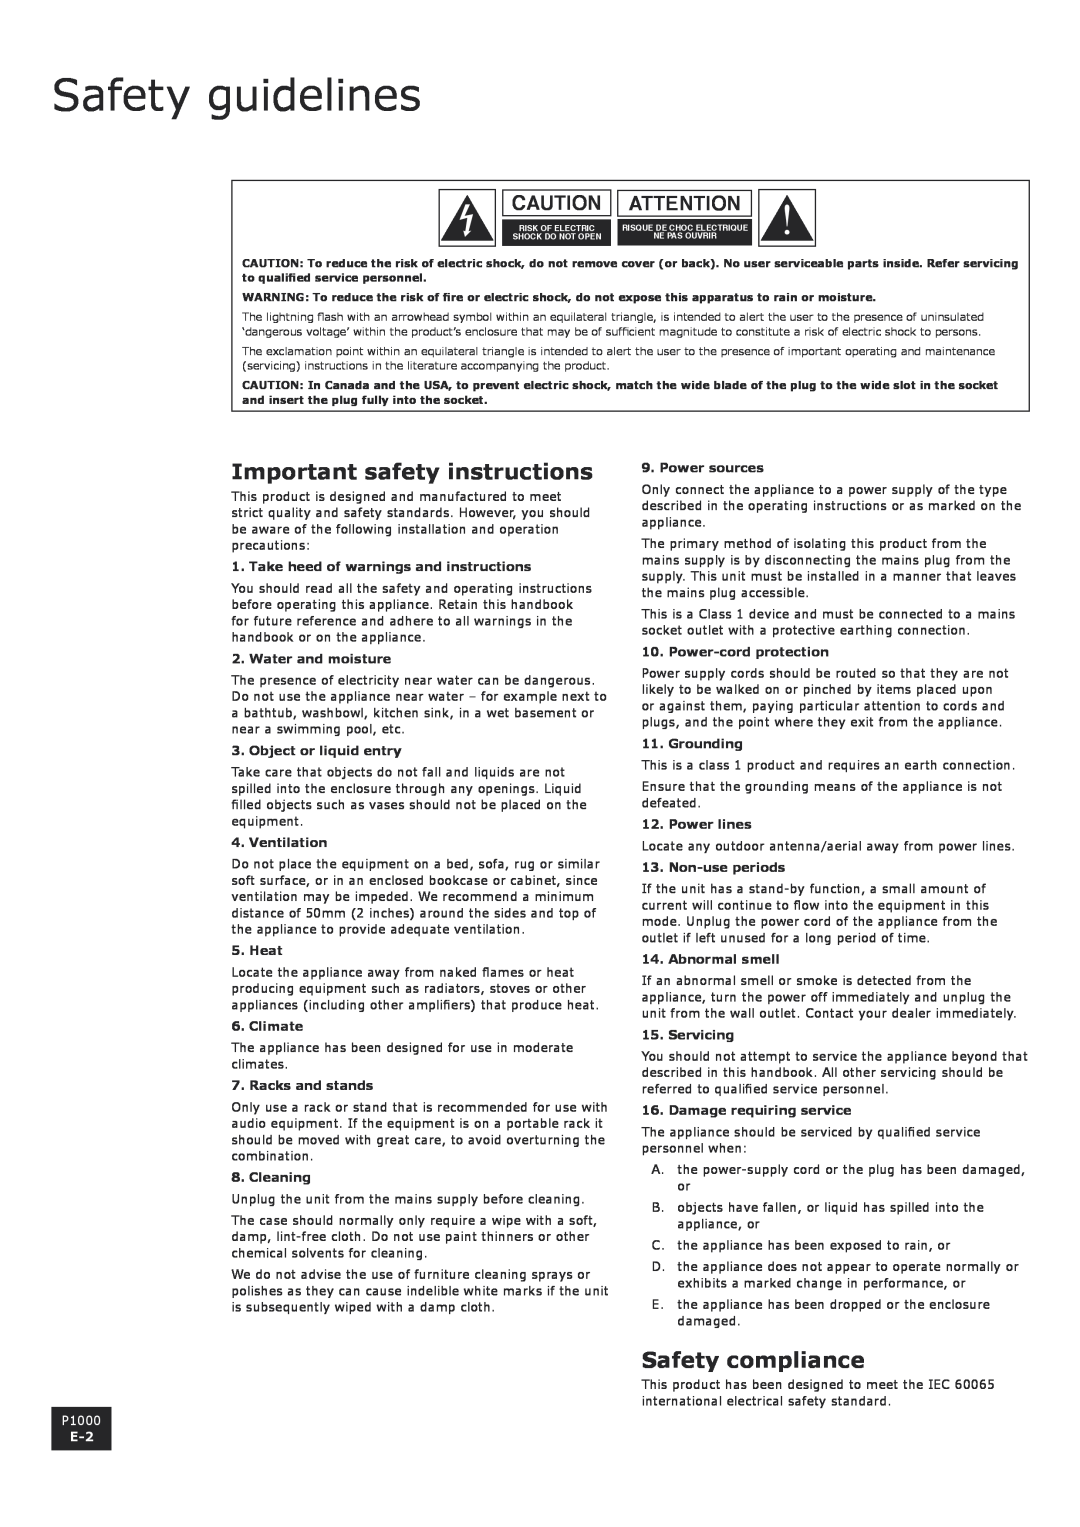 Arcam P1000 Safety guidelines, Important safety instructions, Safety compliance, Take heed of warnings and instructions 